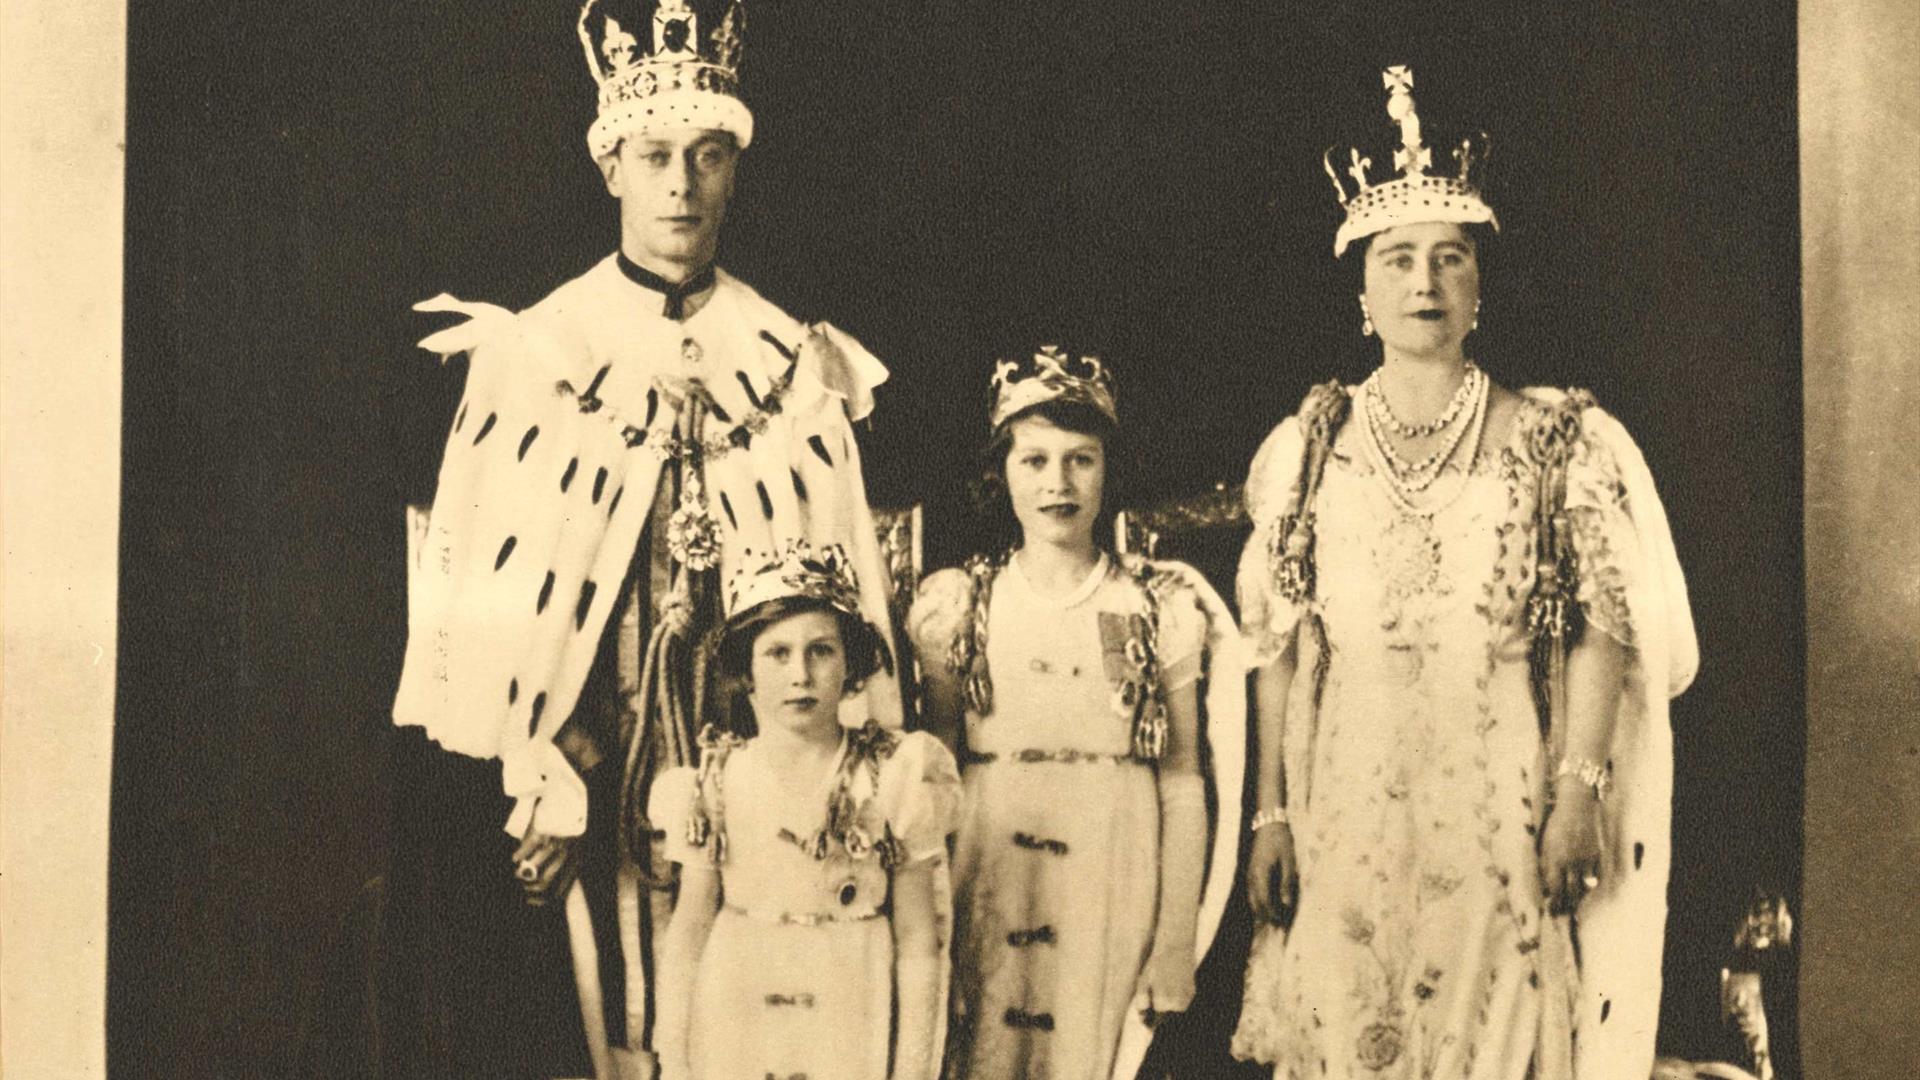 Image taken from the book 'The Coronation of King George VI and Queen Elizabeth', Larne Museum Archives